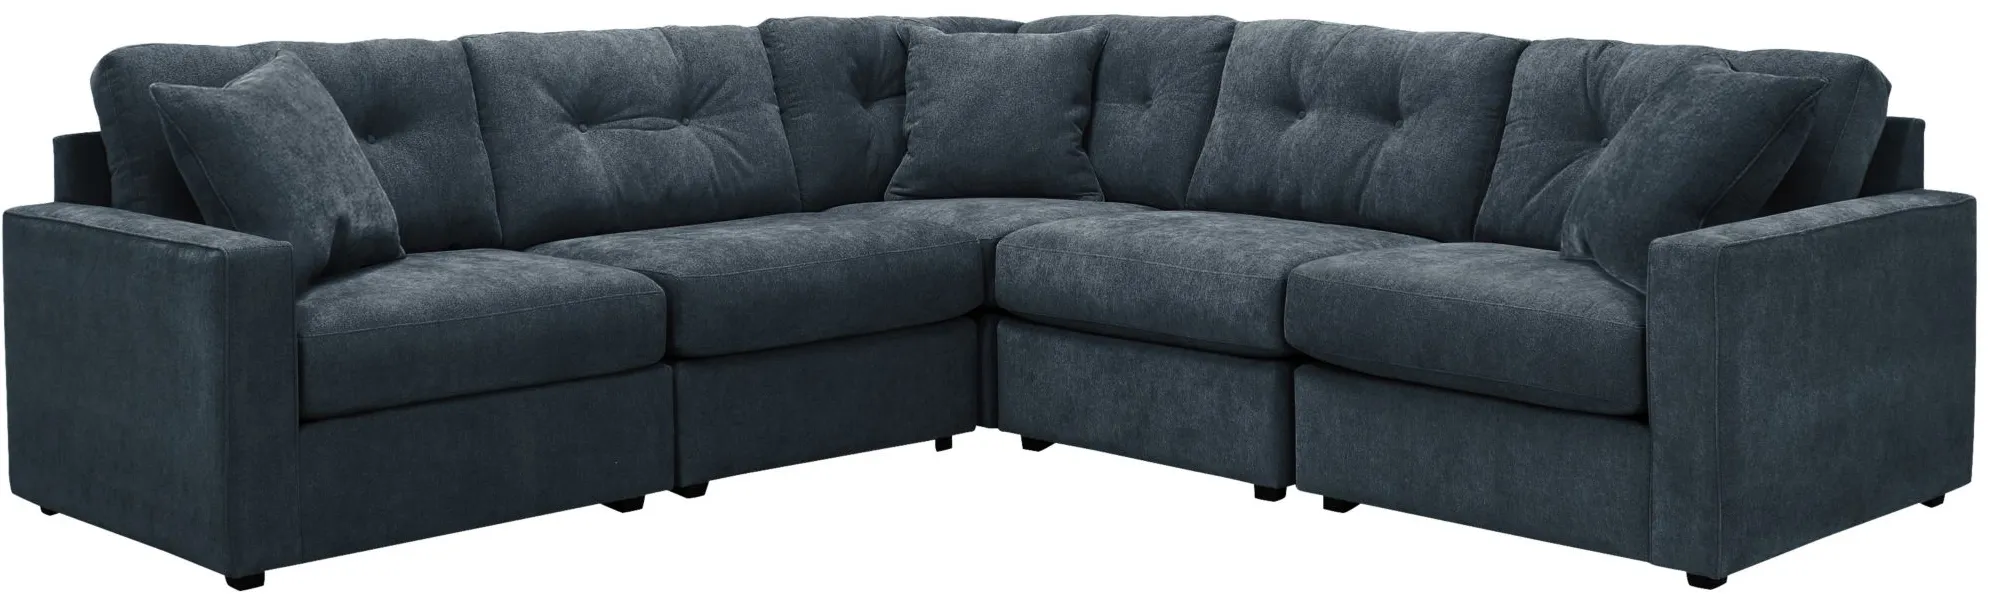 ModularOne 5-pc. Sectional in Navy by H.M. Richards